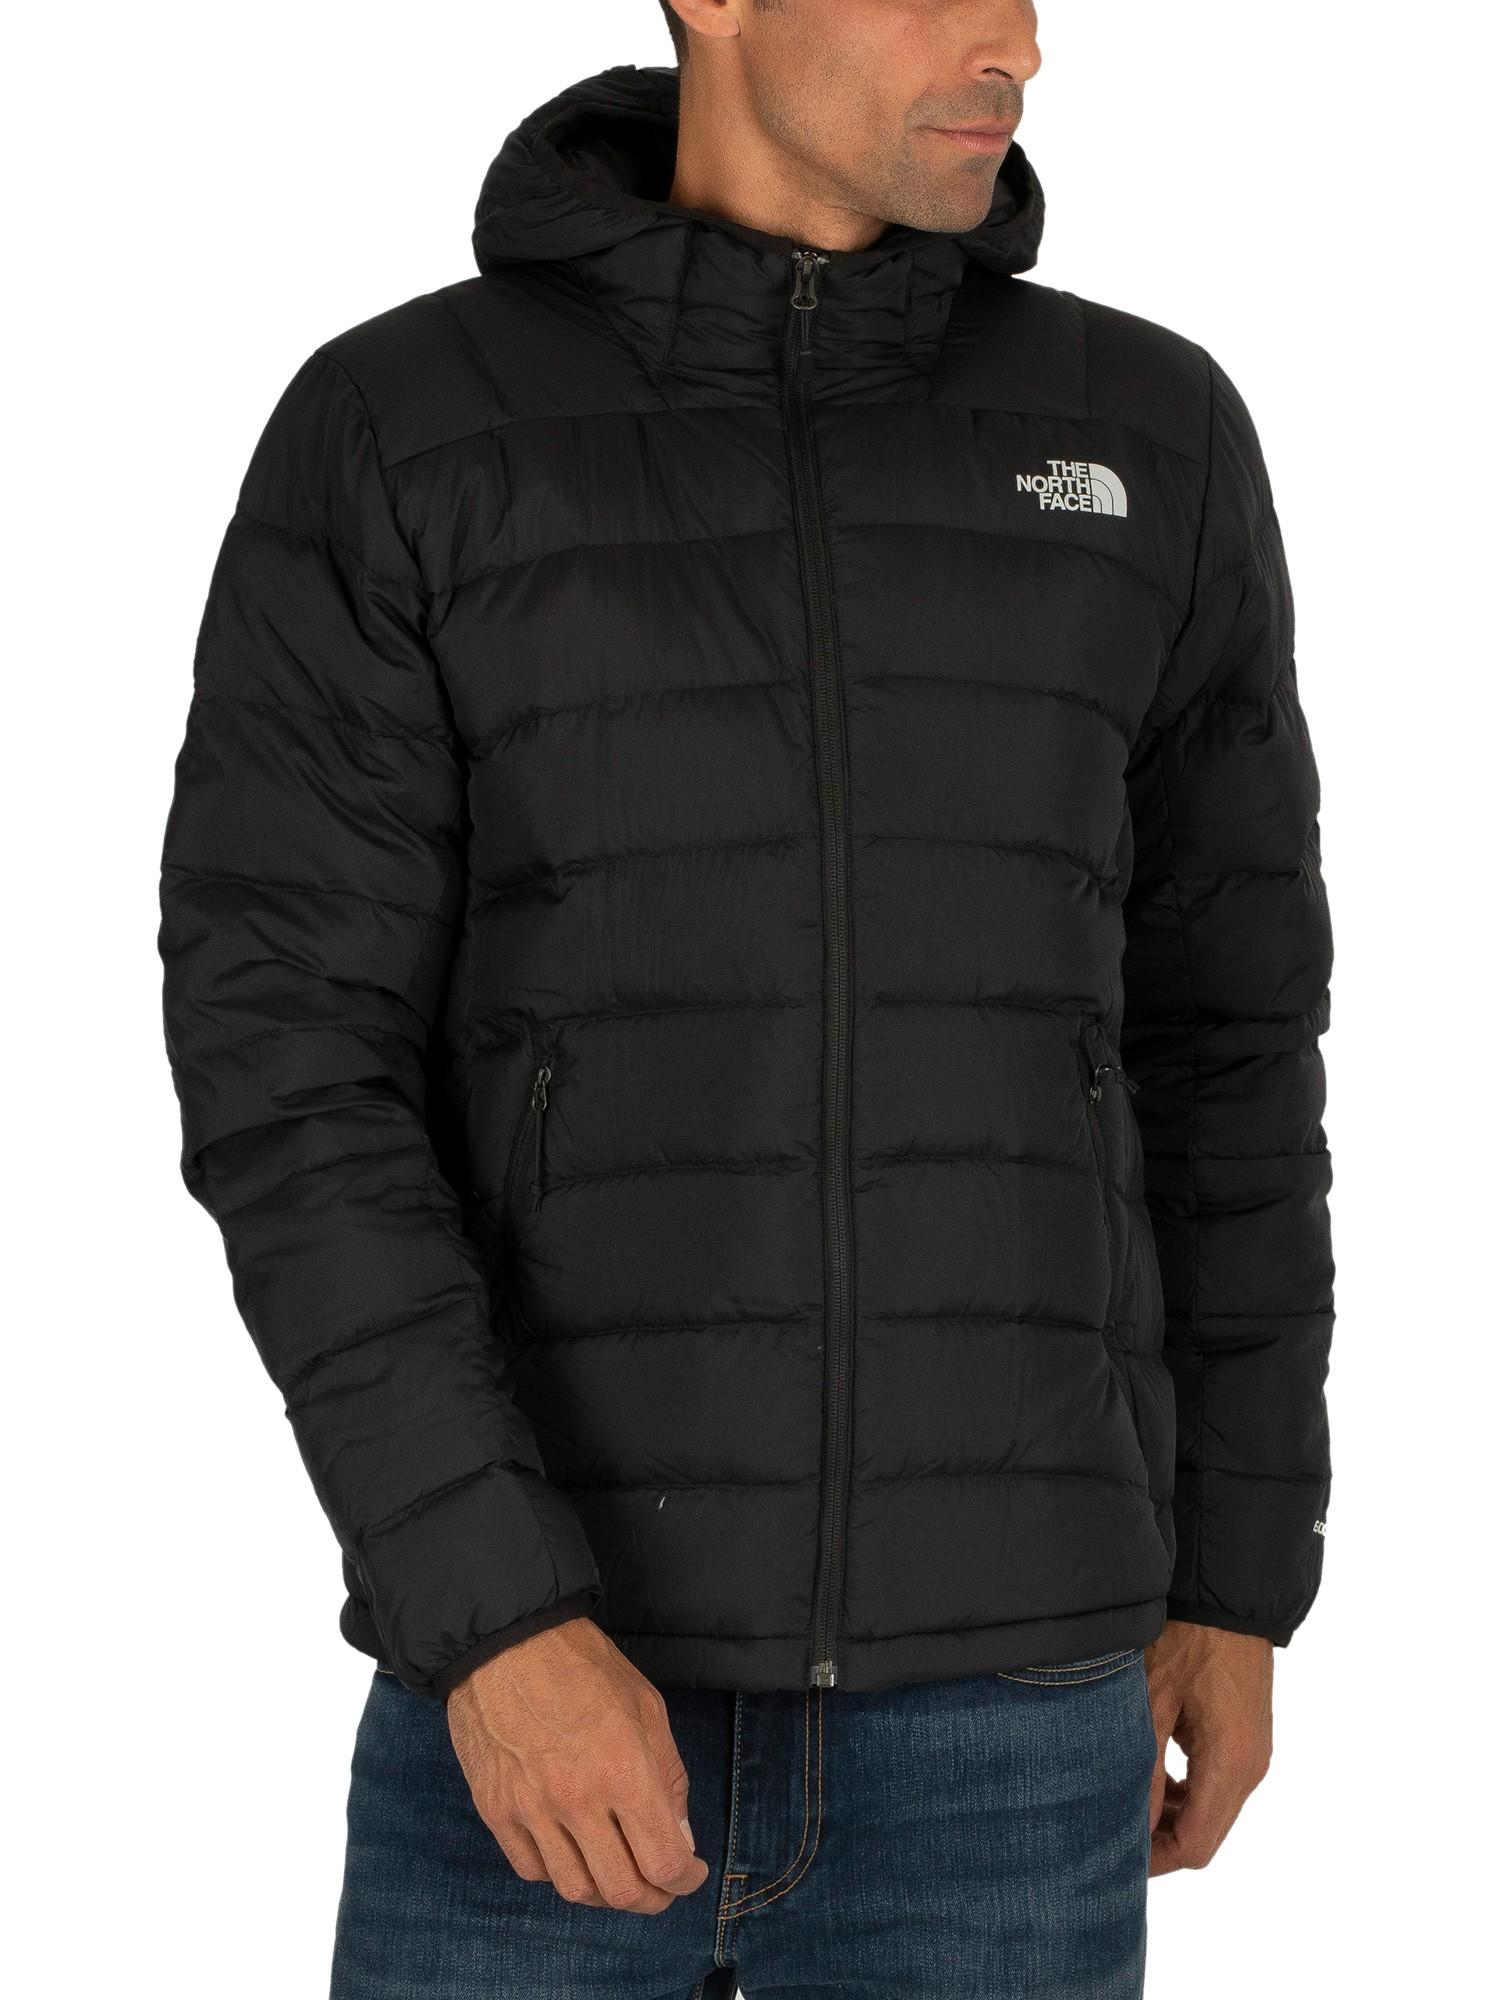 The North Face Synthetic La Paz Down Jacket in Black for Men - Lyst